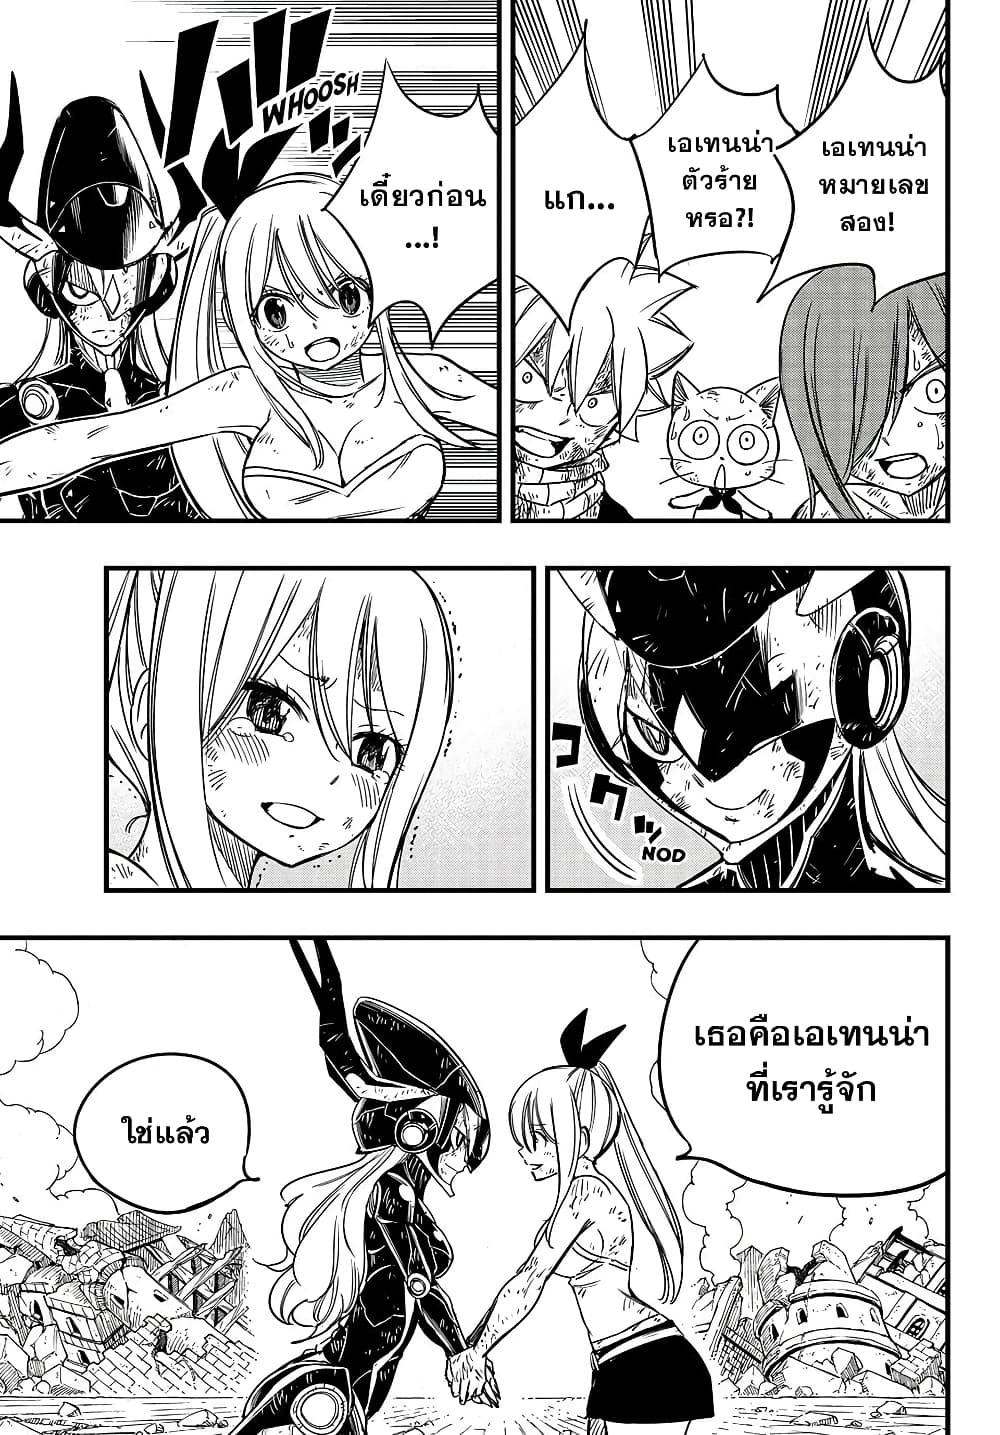 FairyTail 100 Years Quest 153